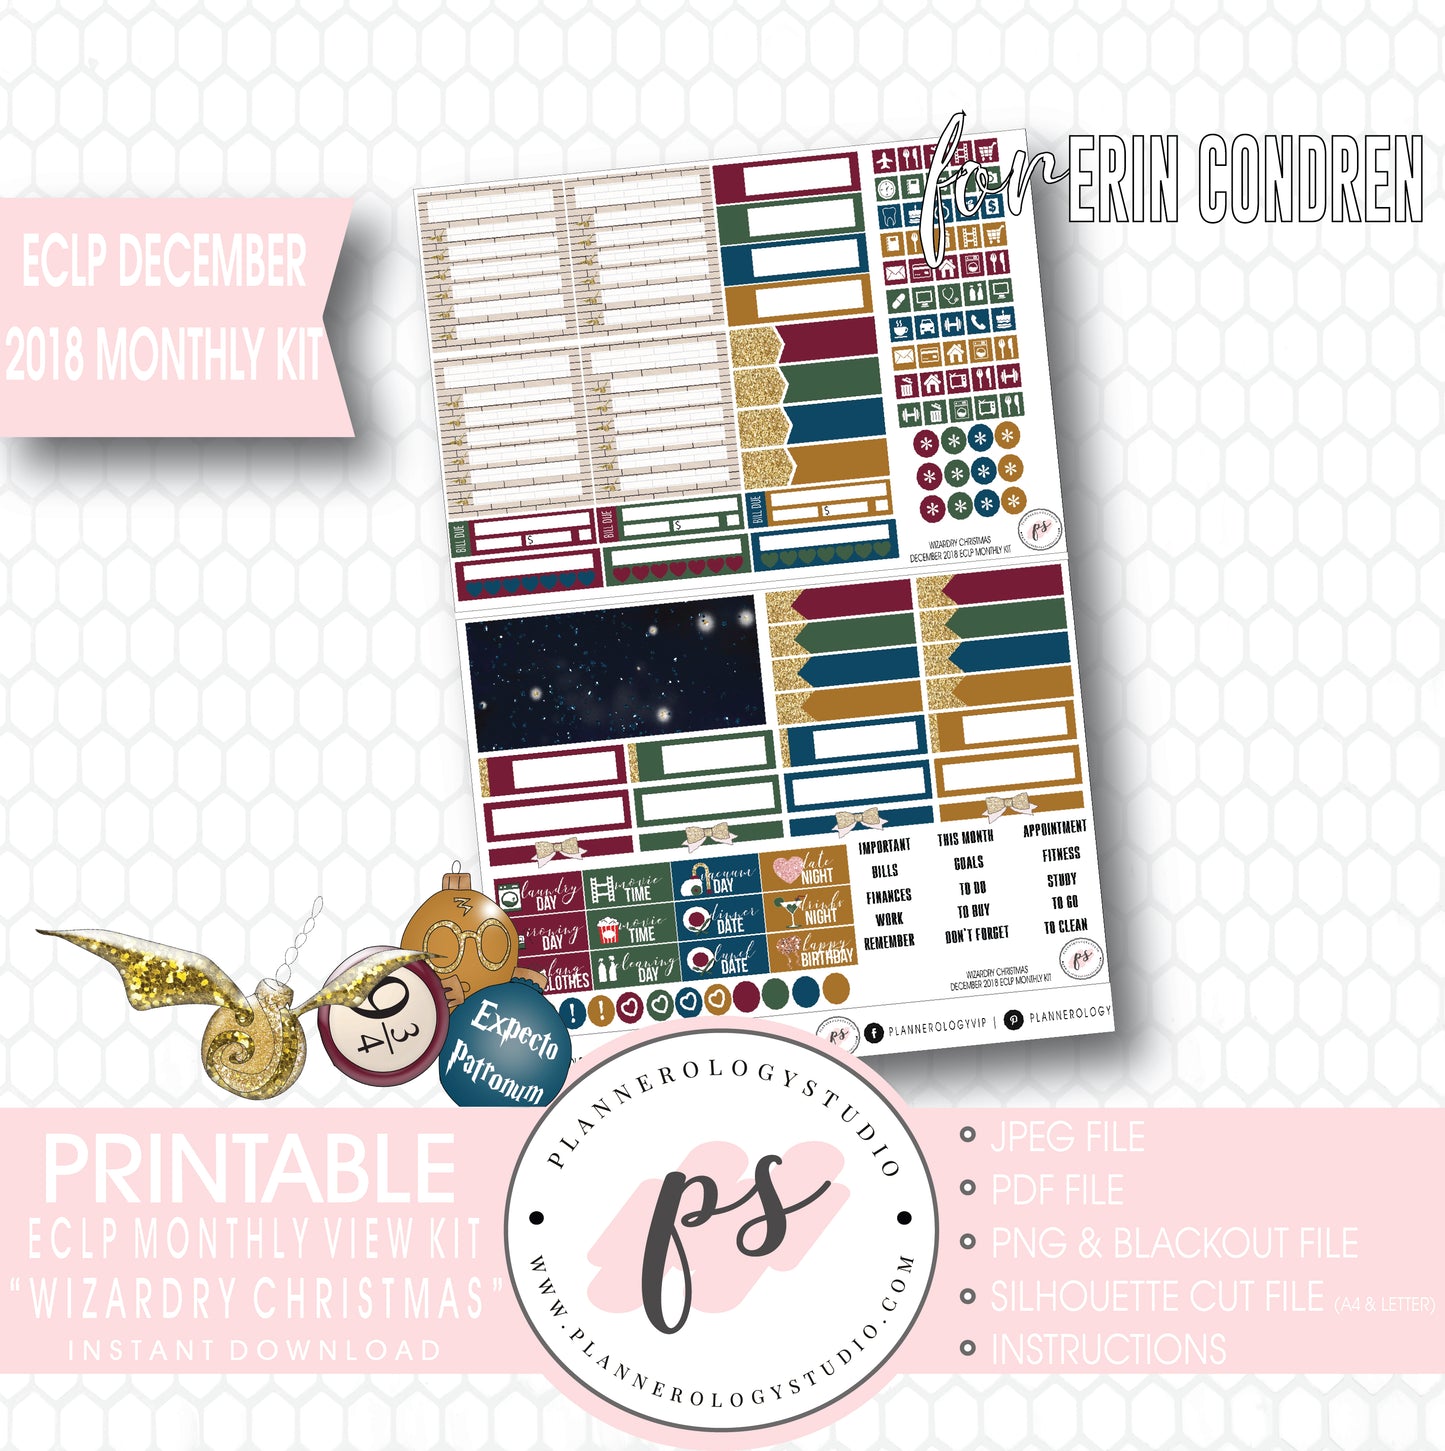 Wizardry Christmas (Harry Potter) Christmas December 2018 Monthly View Kit Digital Printable Planner Stickers (for use with Erin Condren) - Plannerologystudio